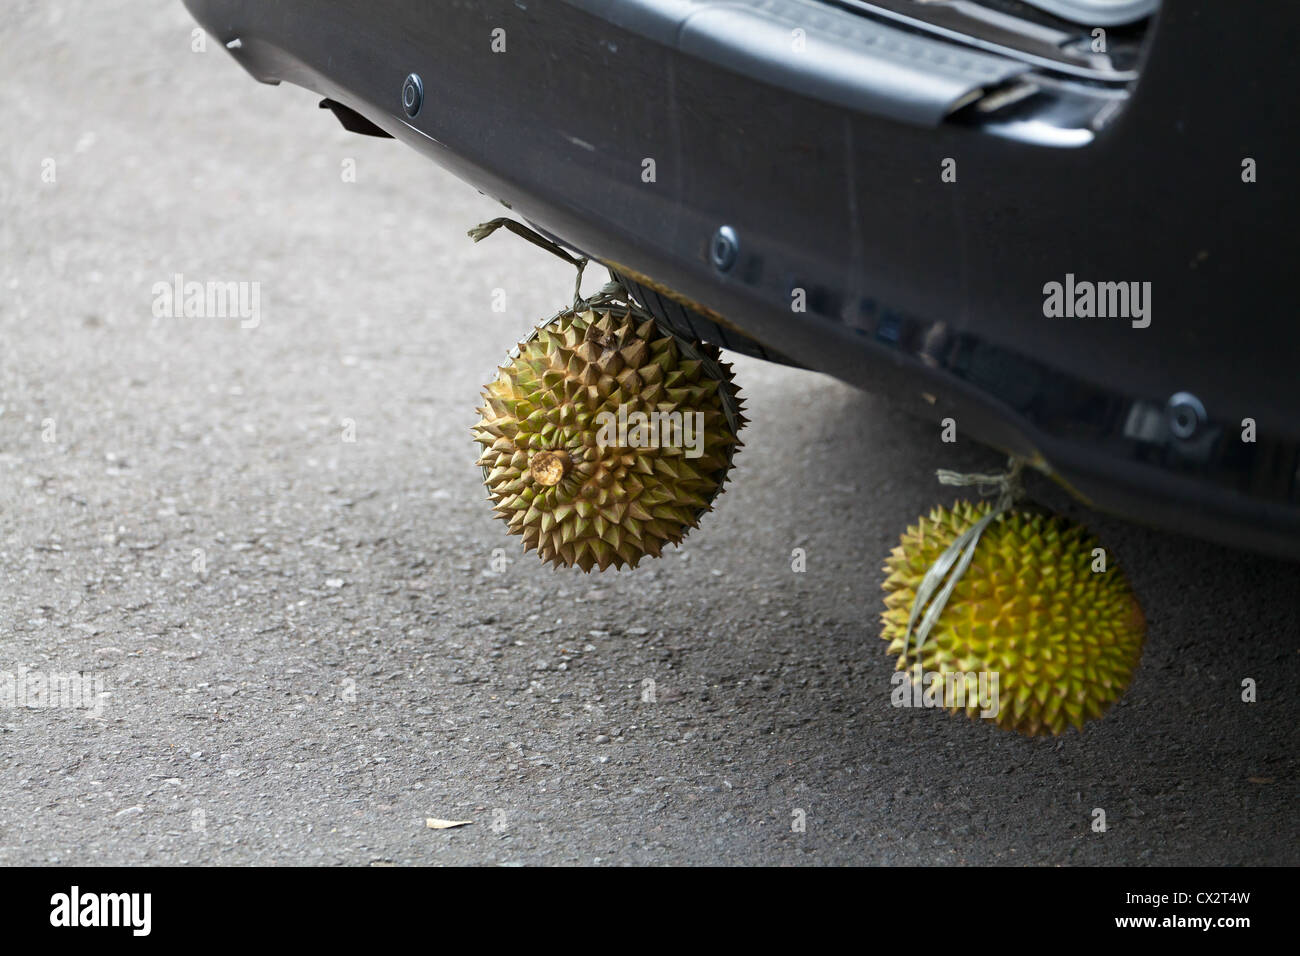 Durians hanging under a Car on Bali Stock Photo